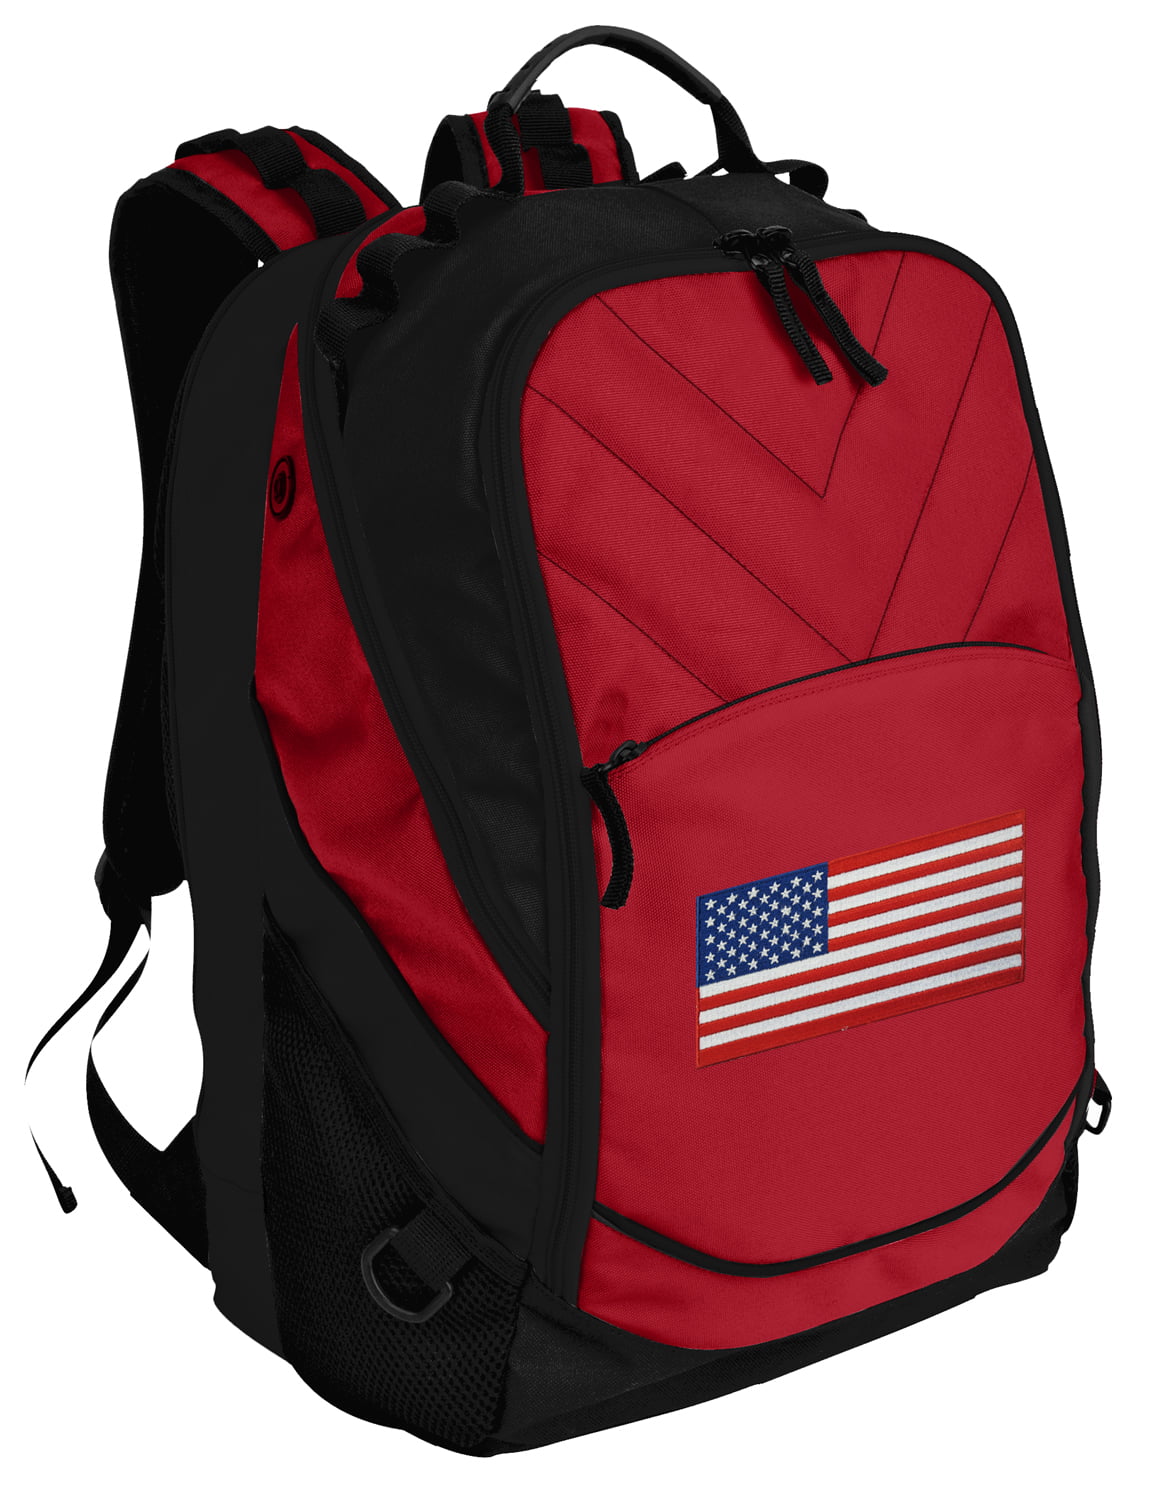 XTYND556 Dinosaurs Us Flag College Commuter Backpack Large Capacity Laptop Bag 17 Inch Travel Bag 